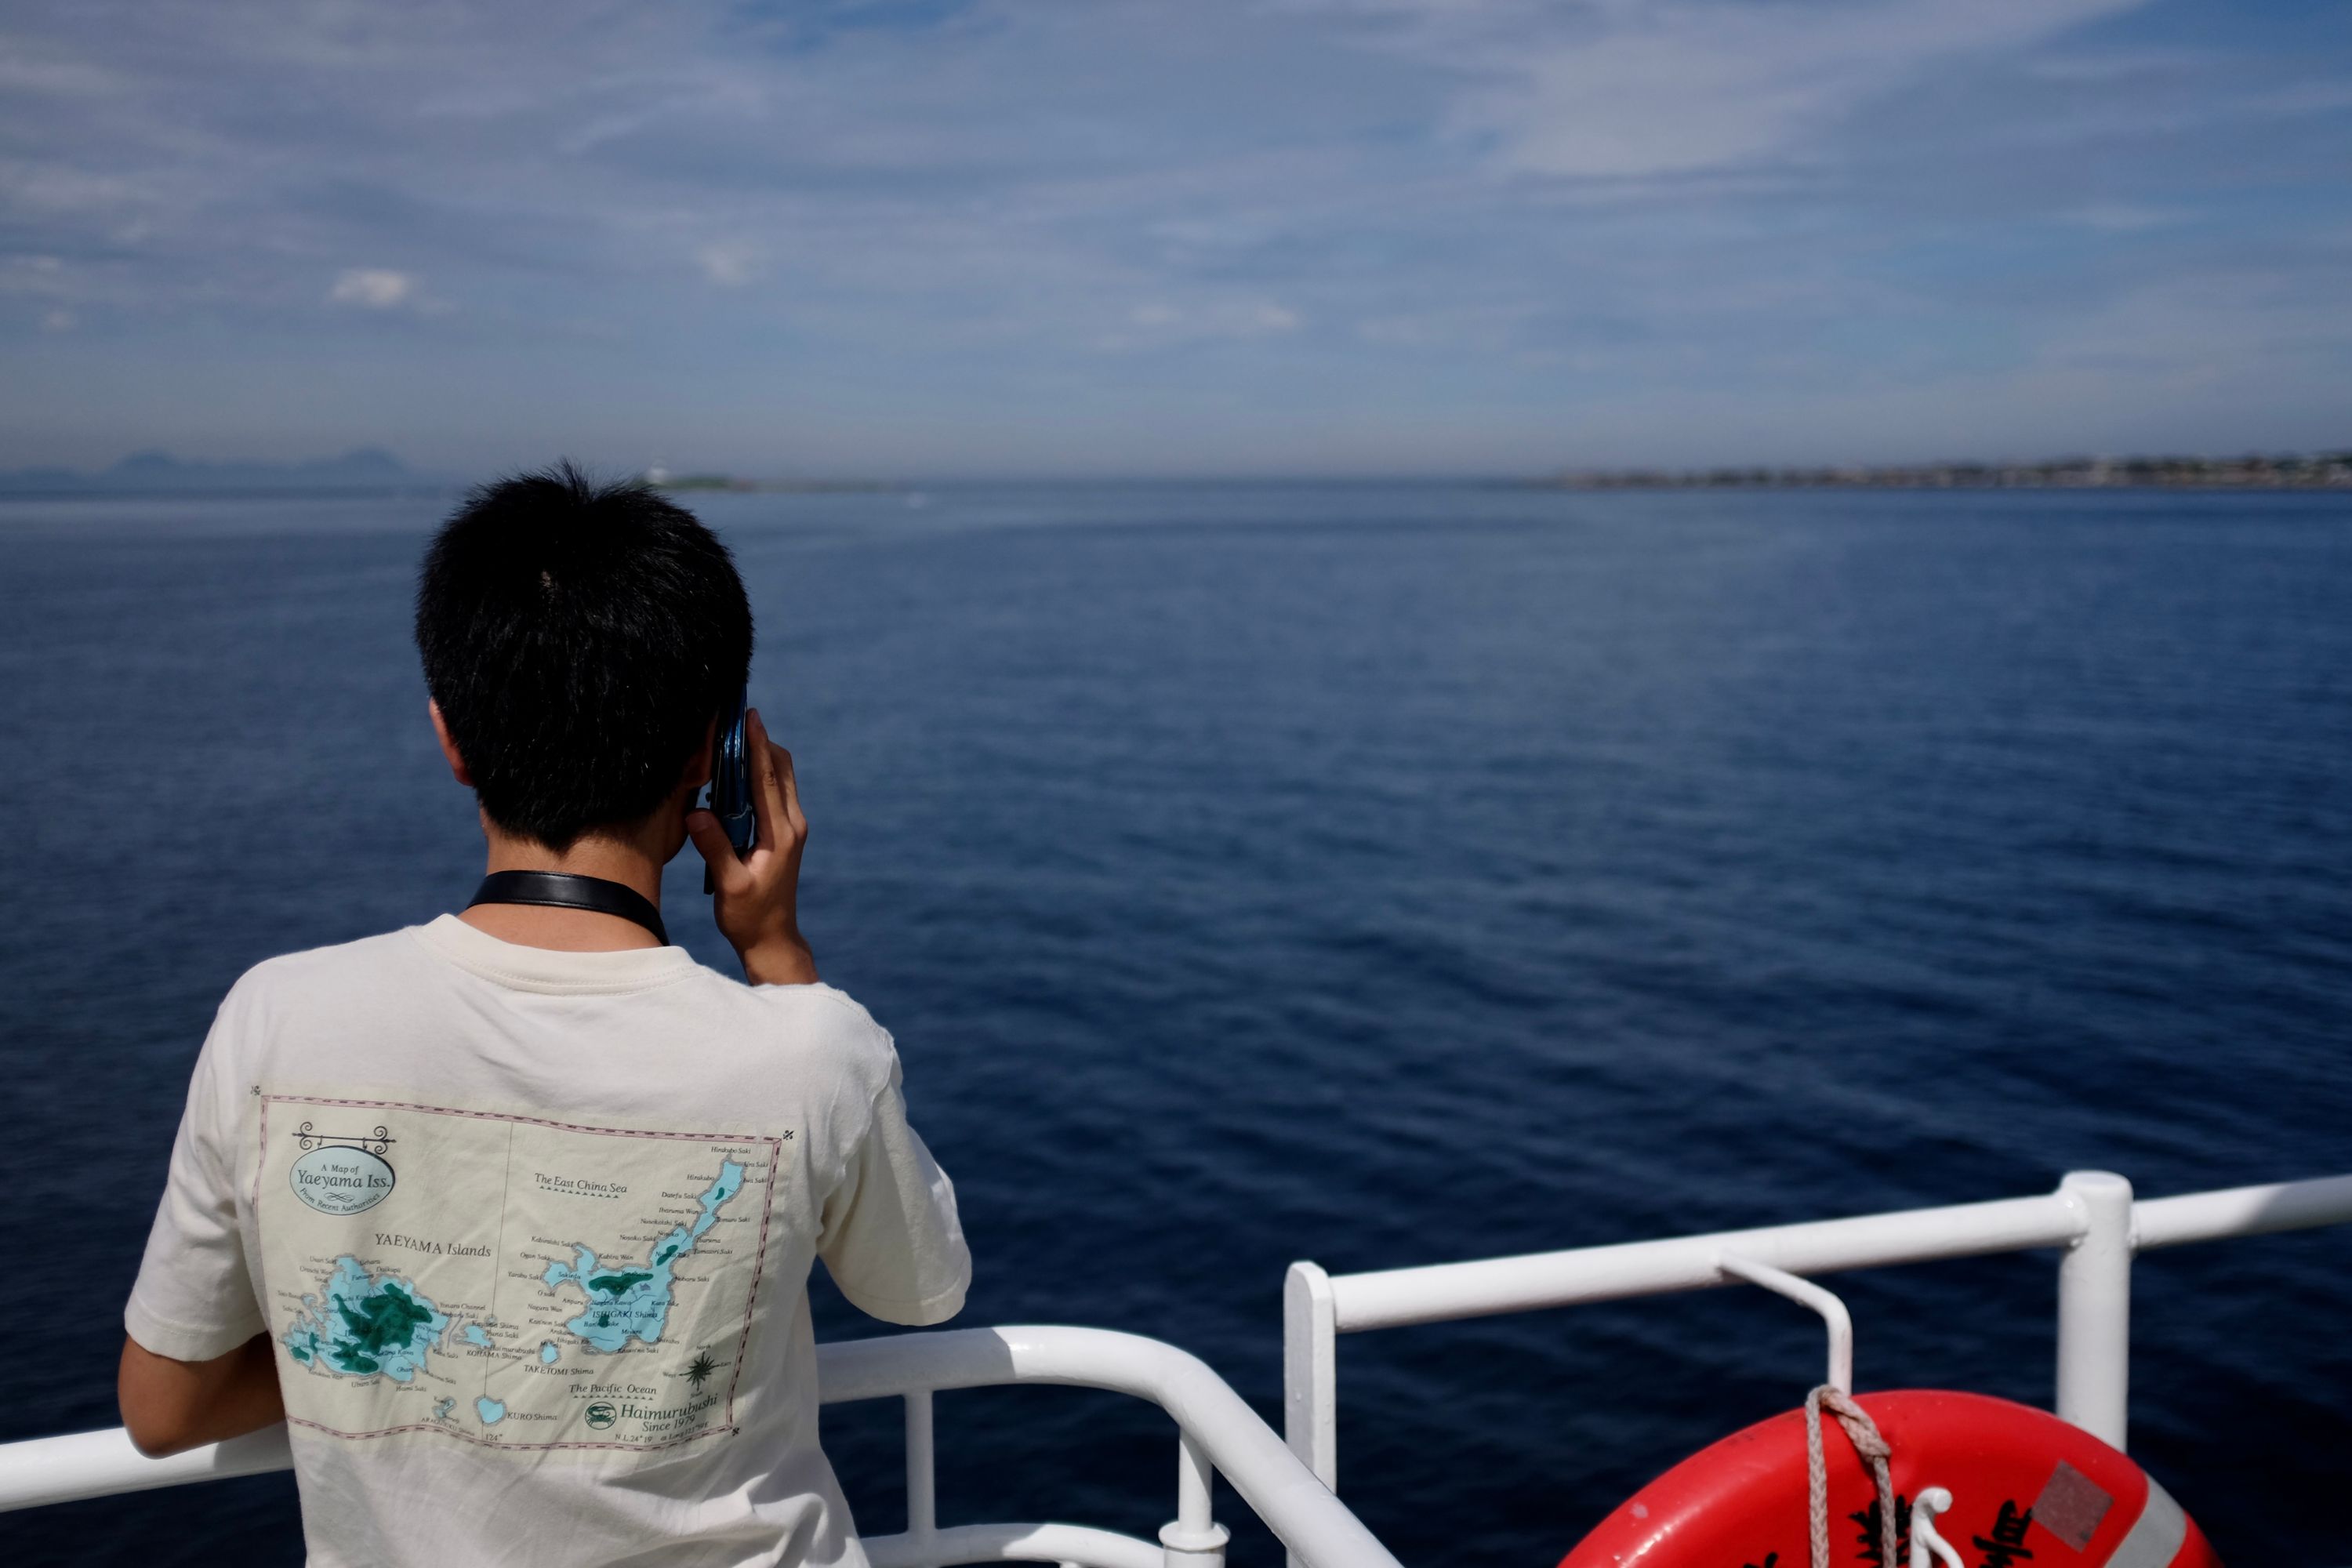 A man at the railing of a ferry looks out at the sea, wearing a t-shirt decorated with Ishigaki and Iriomote, two of Japan’s southernmost islands, thousands of kilometers away.